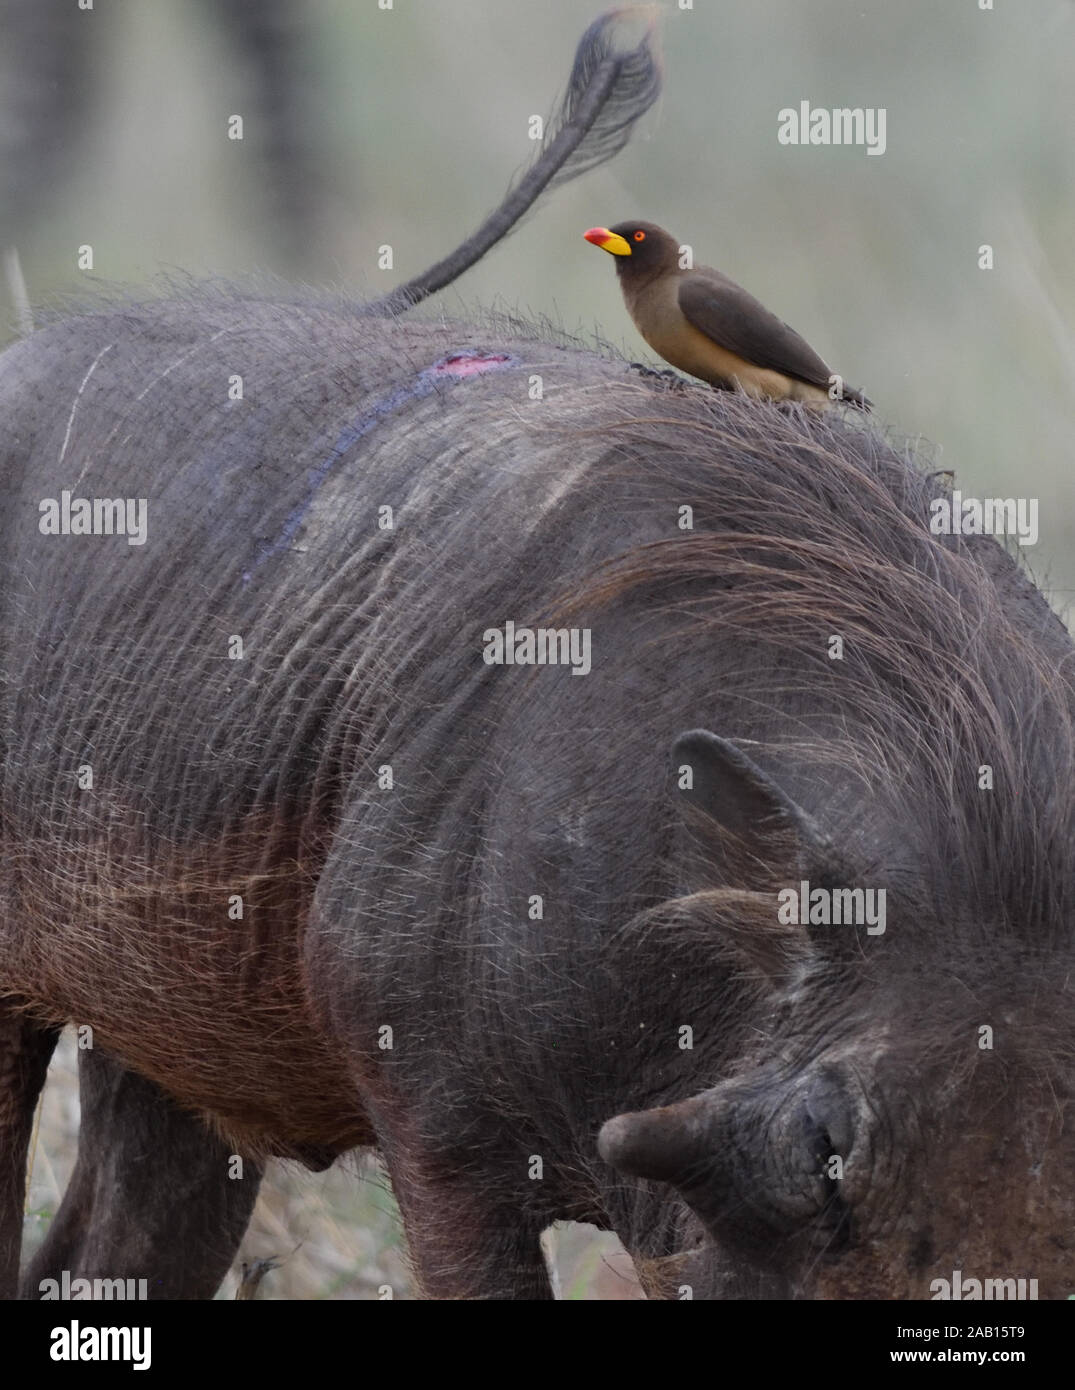 A yellow-billed oxpecker (Buphagus africanus) on the back of a common warthog (Phacochoerus africanus). The oxpecker appears to have been feeding at a Stock Photo